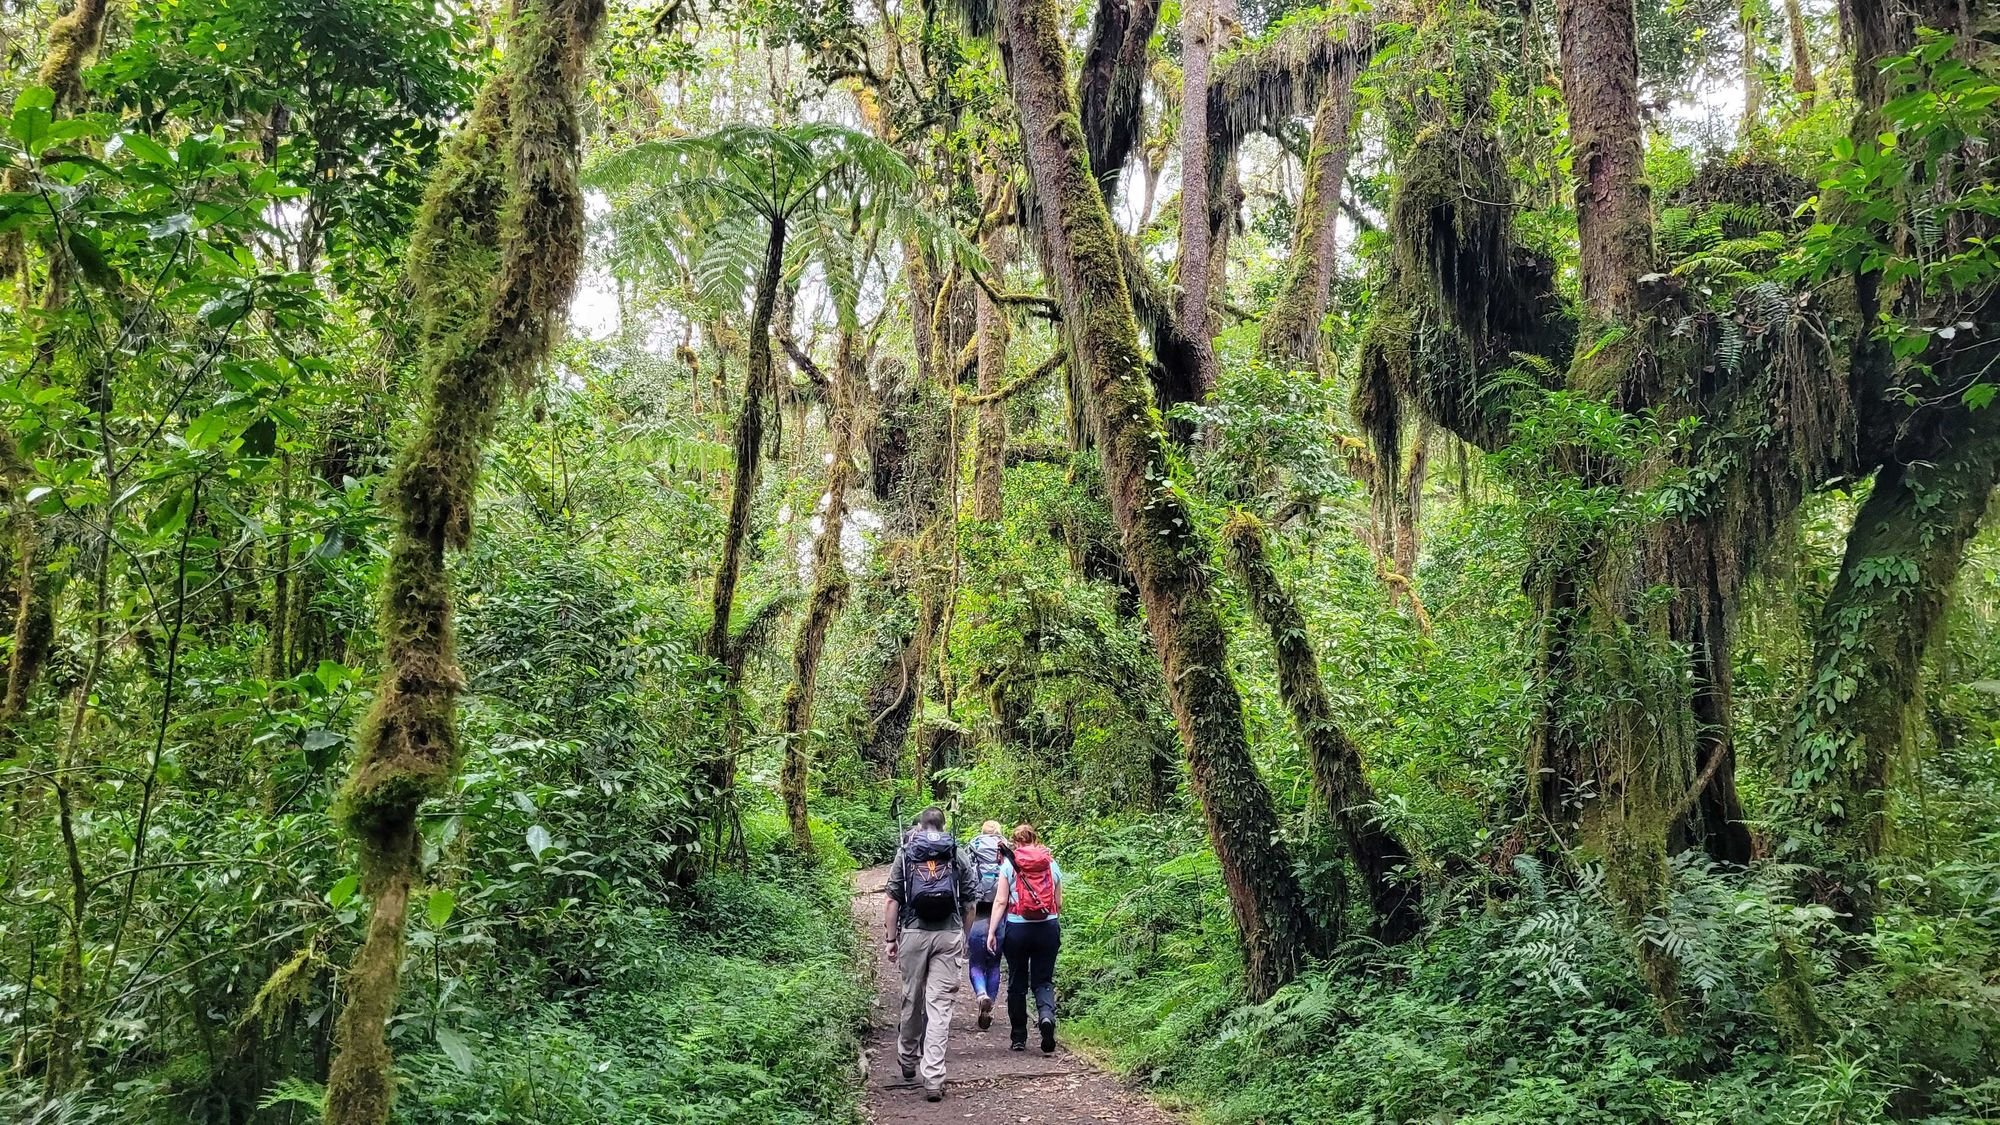 Hikers on the trail through montane forest in Kilimanjaro, Tanzania.